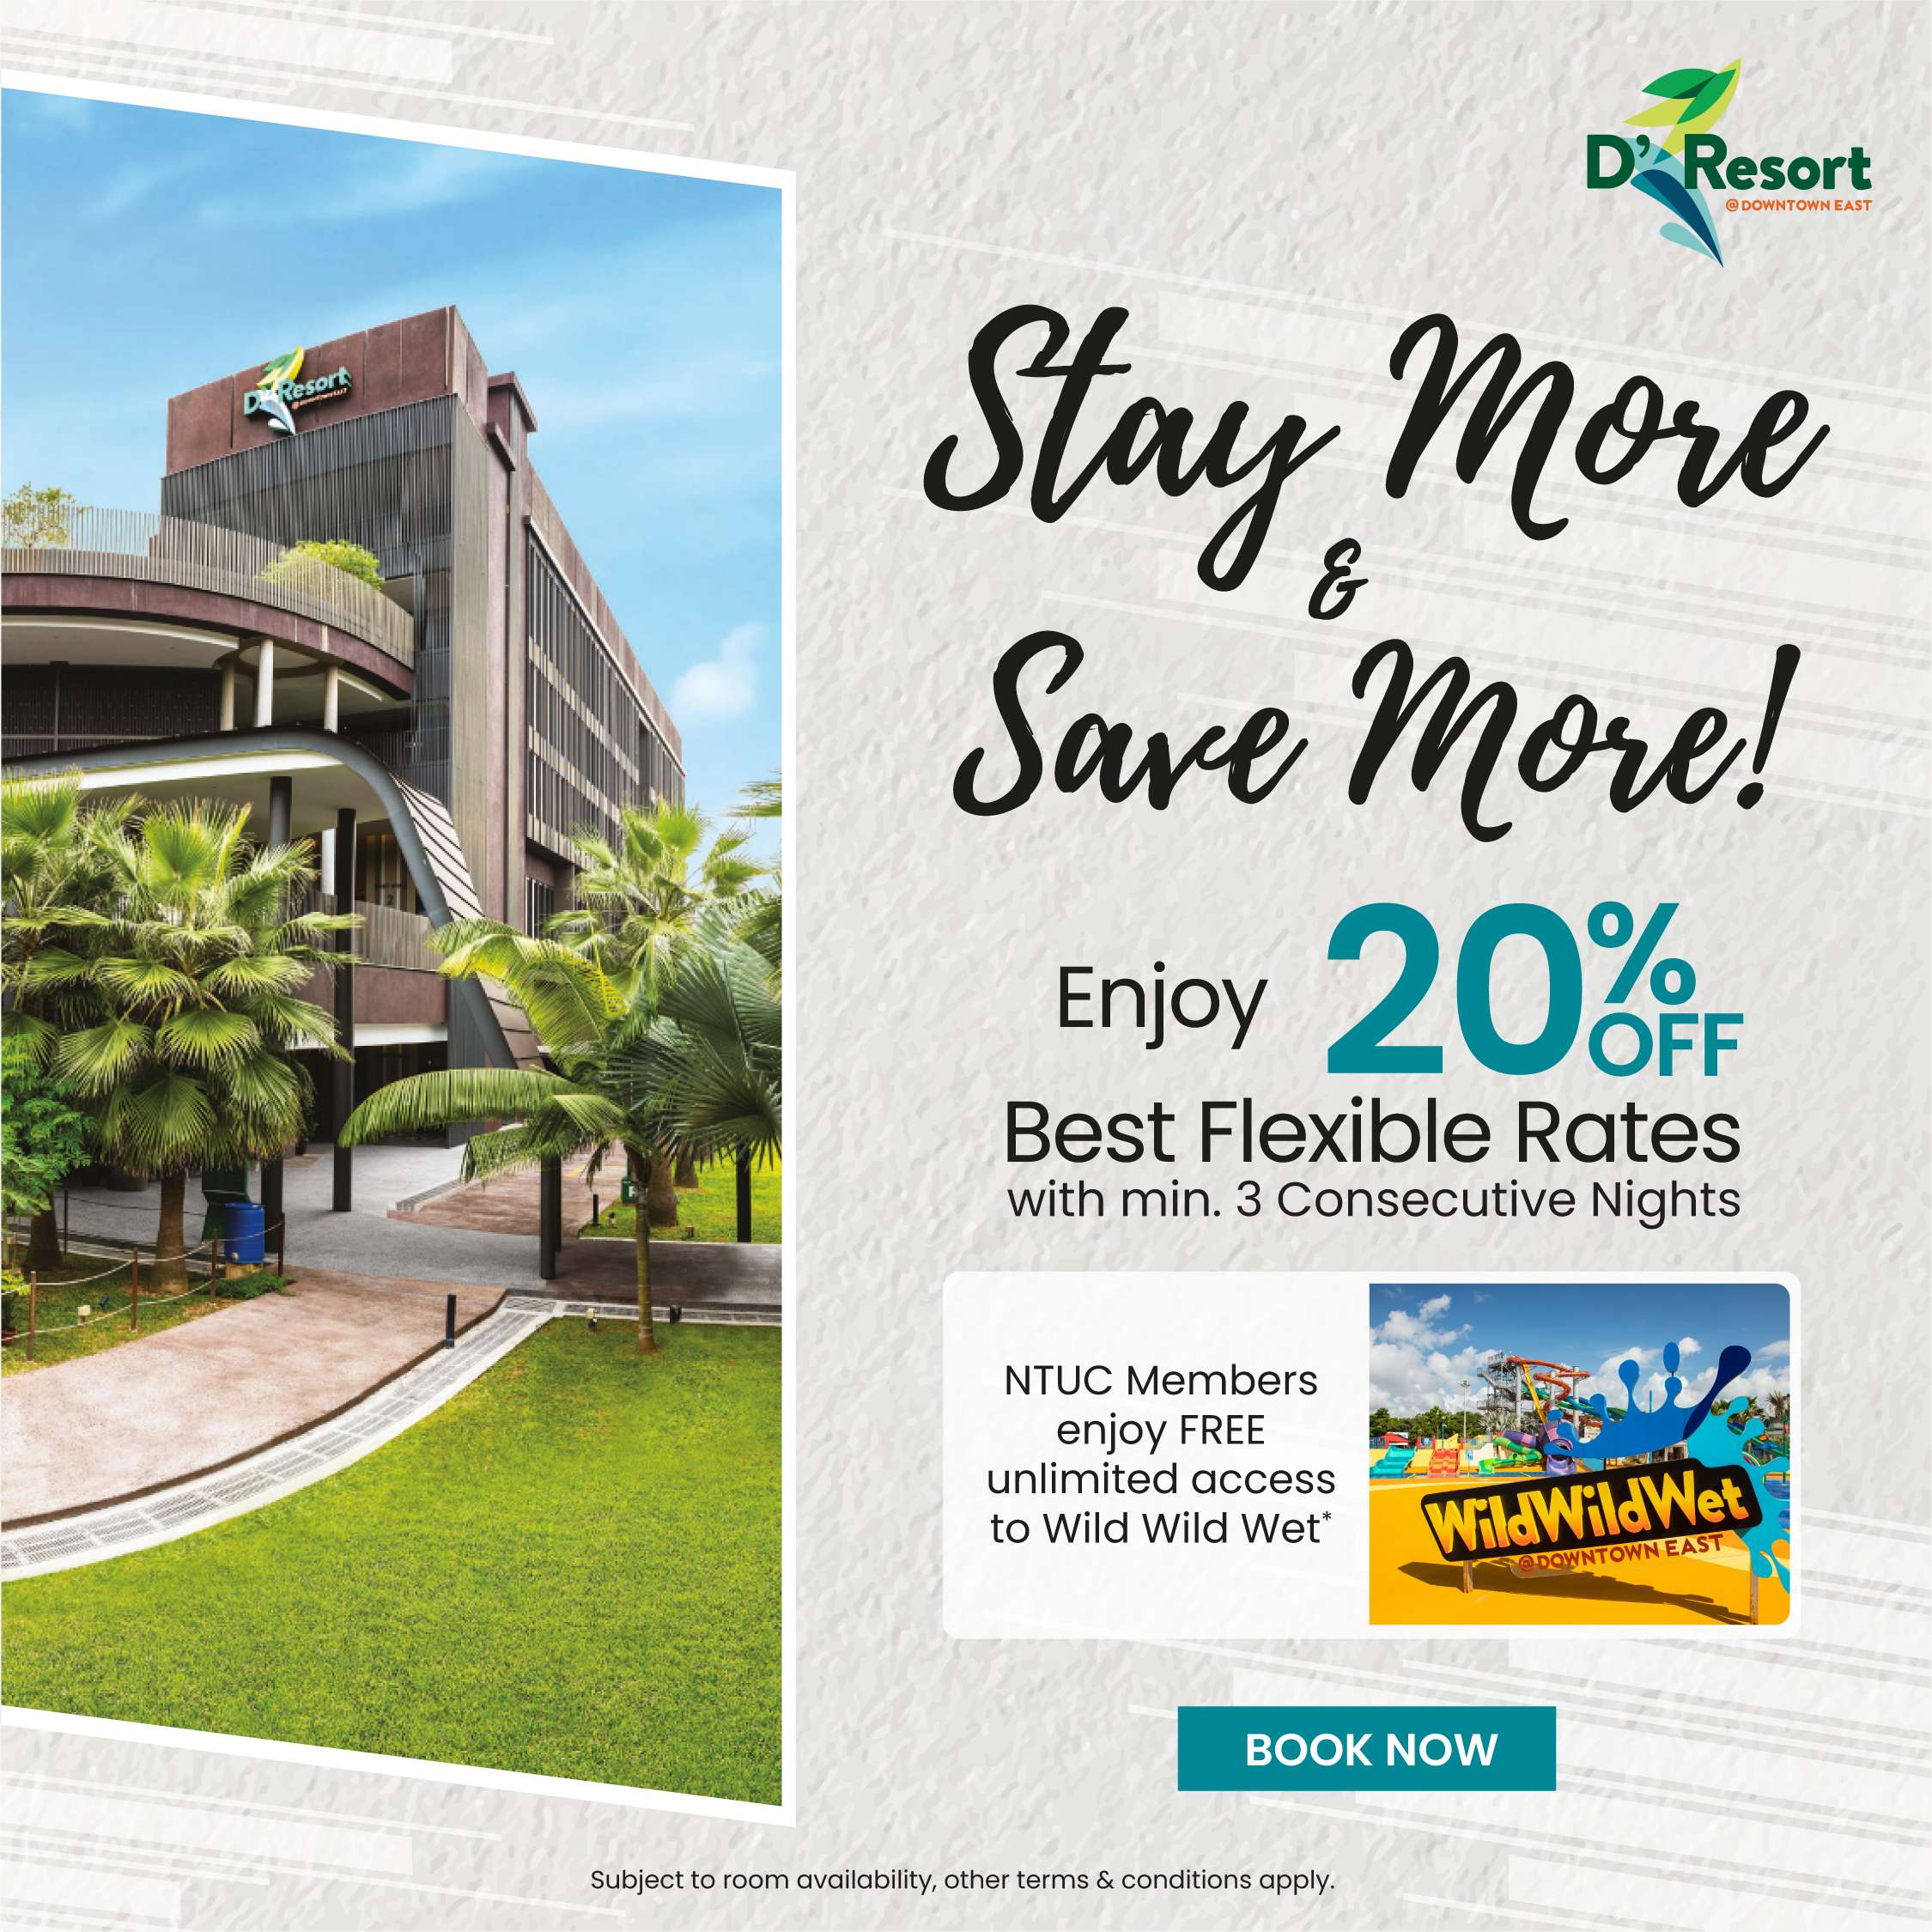 Stay More & Save More at D'Resort